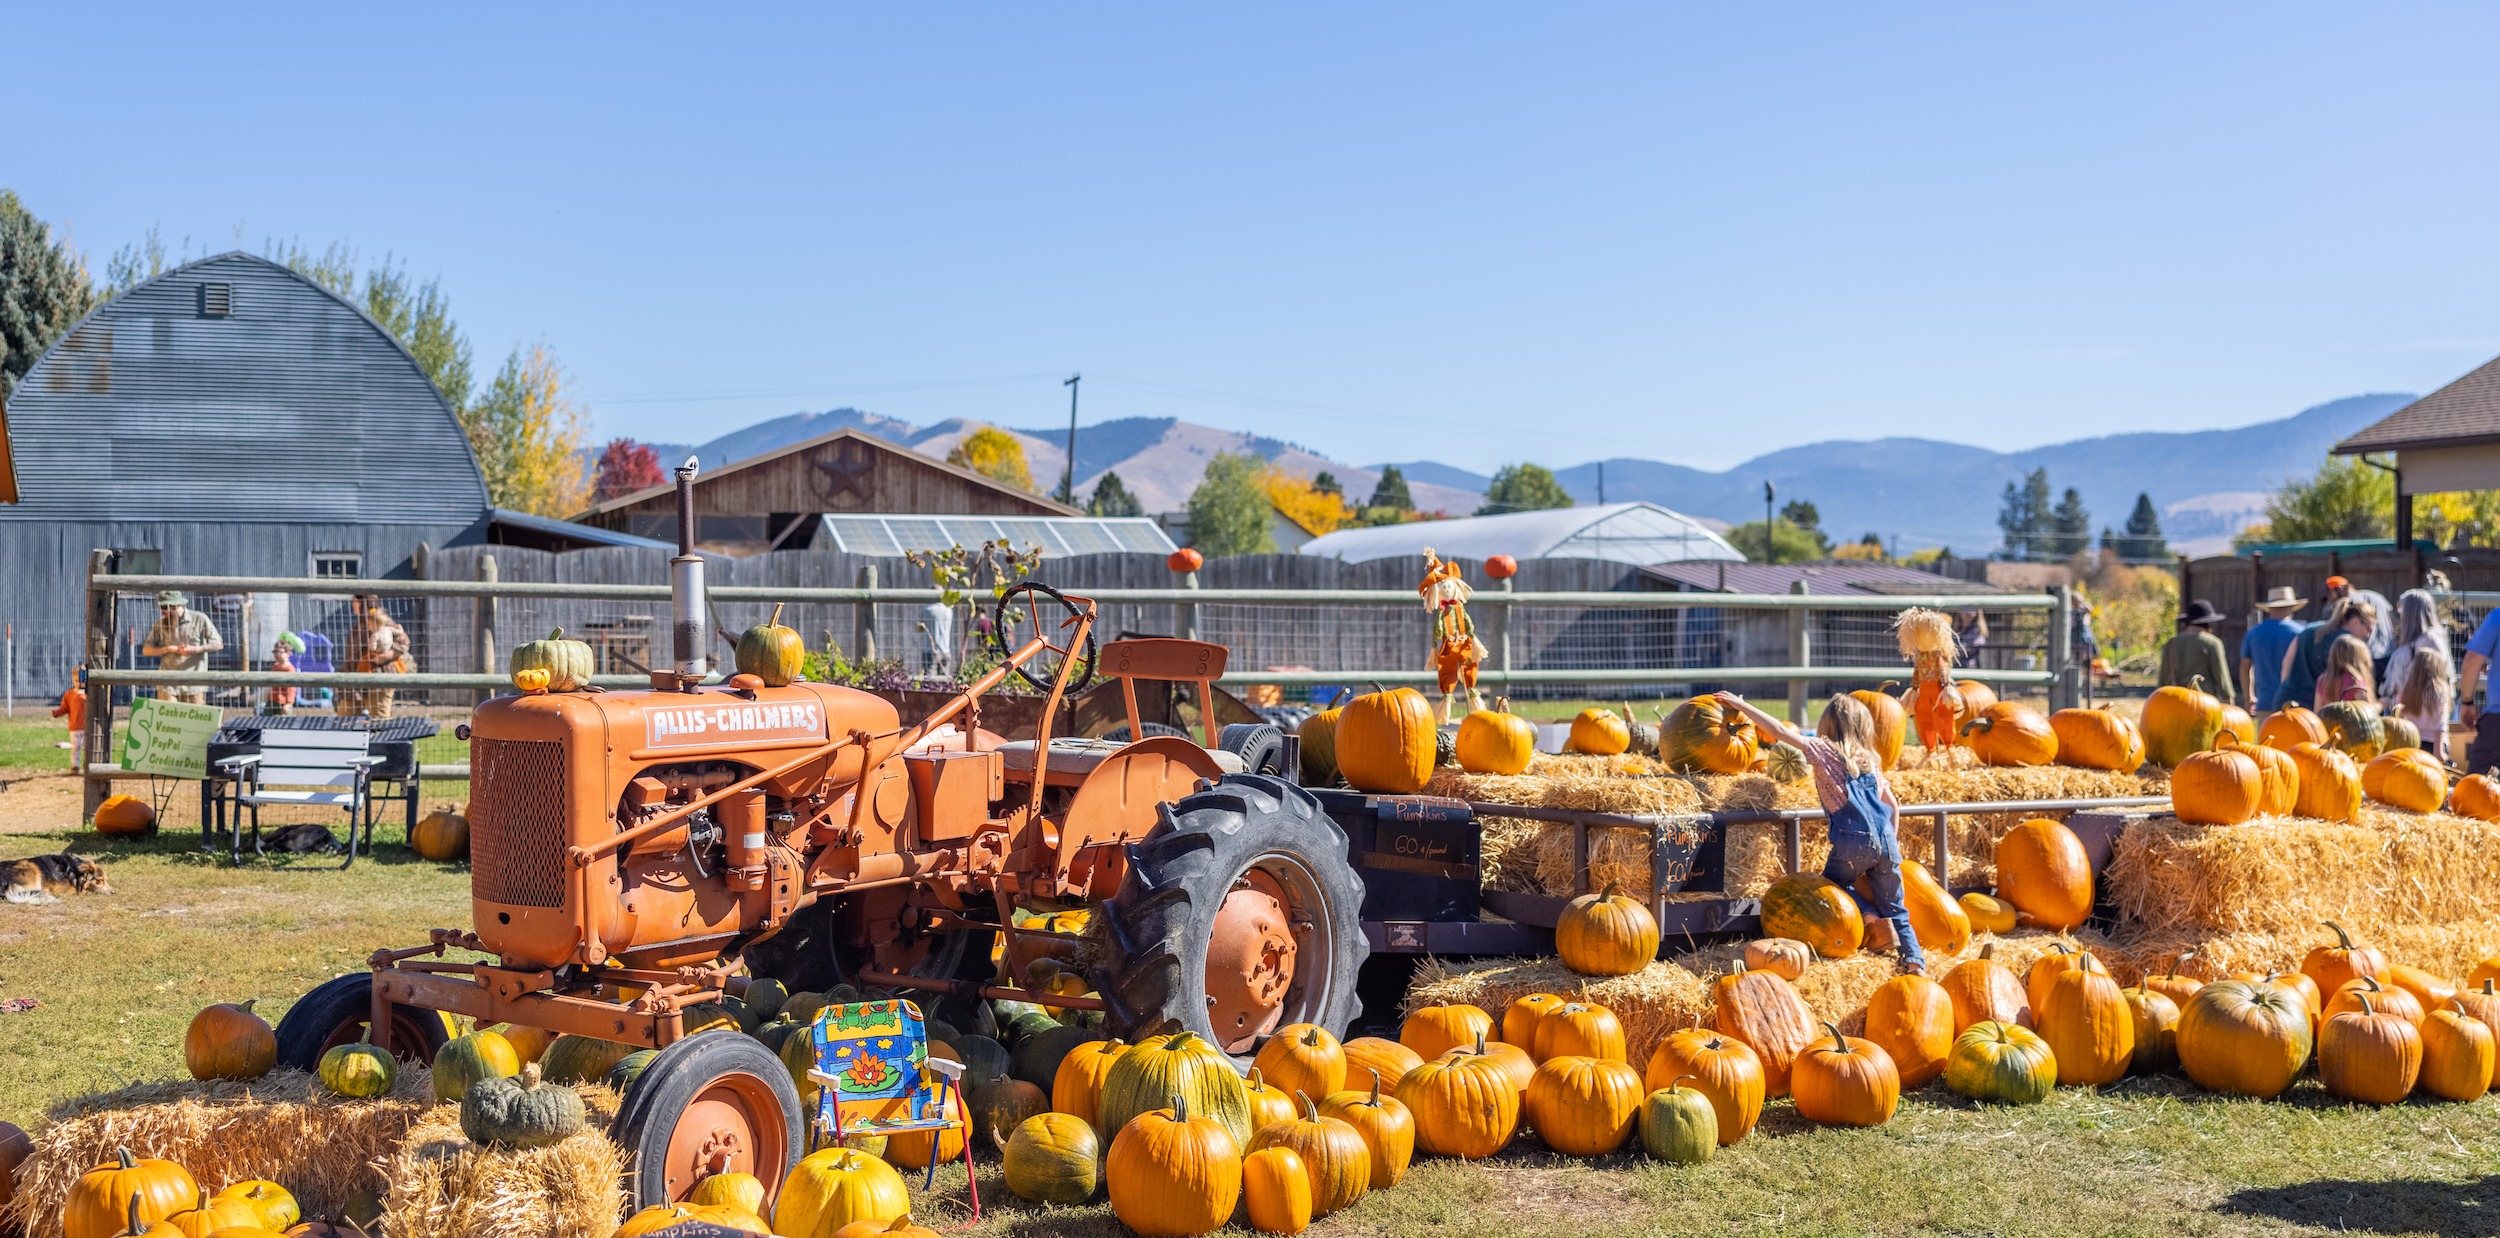 Your Monthly Guide to Missoula: October